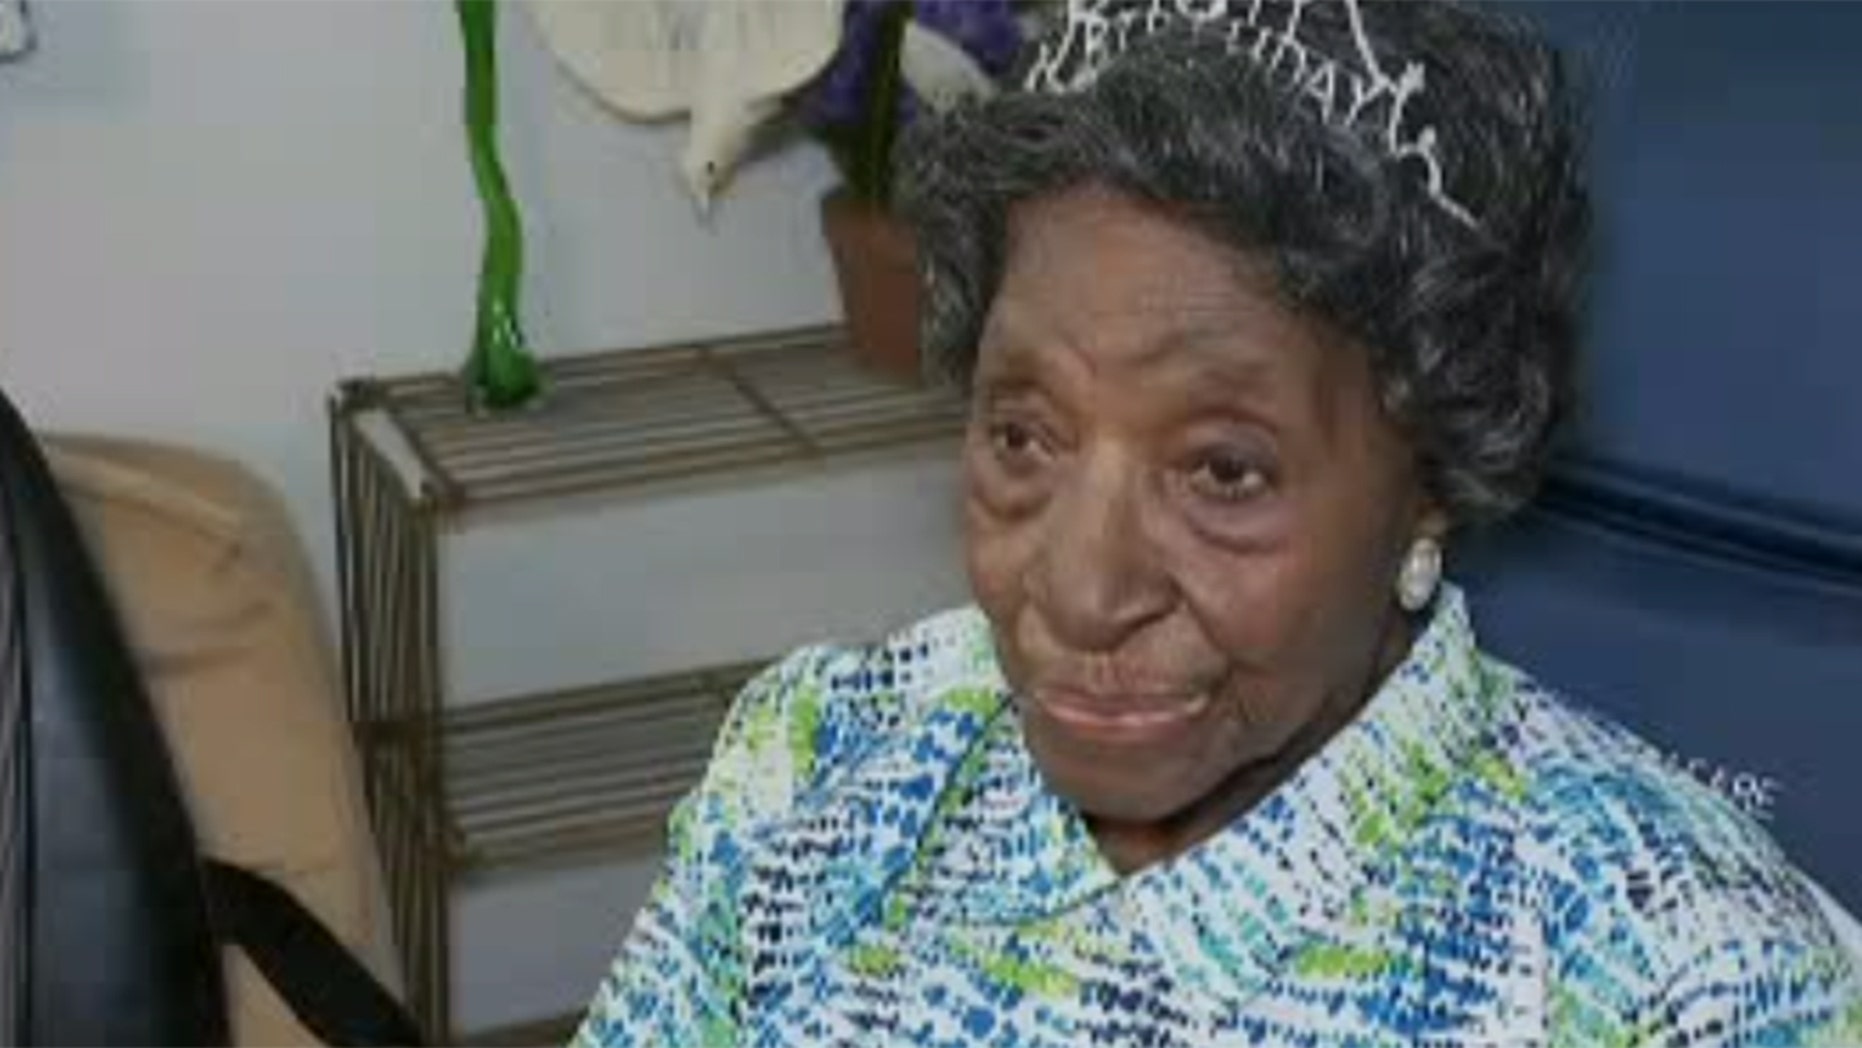 Elizabeth Francis of Houston, Texas turned 110 last week, celebrating alongside friends and family. She credits her faith in God for a long and healthy life.